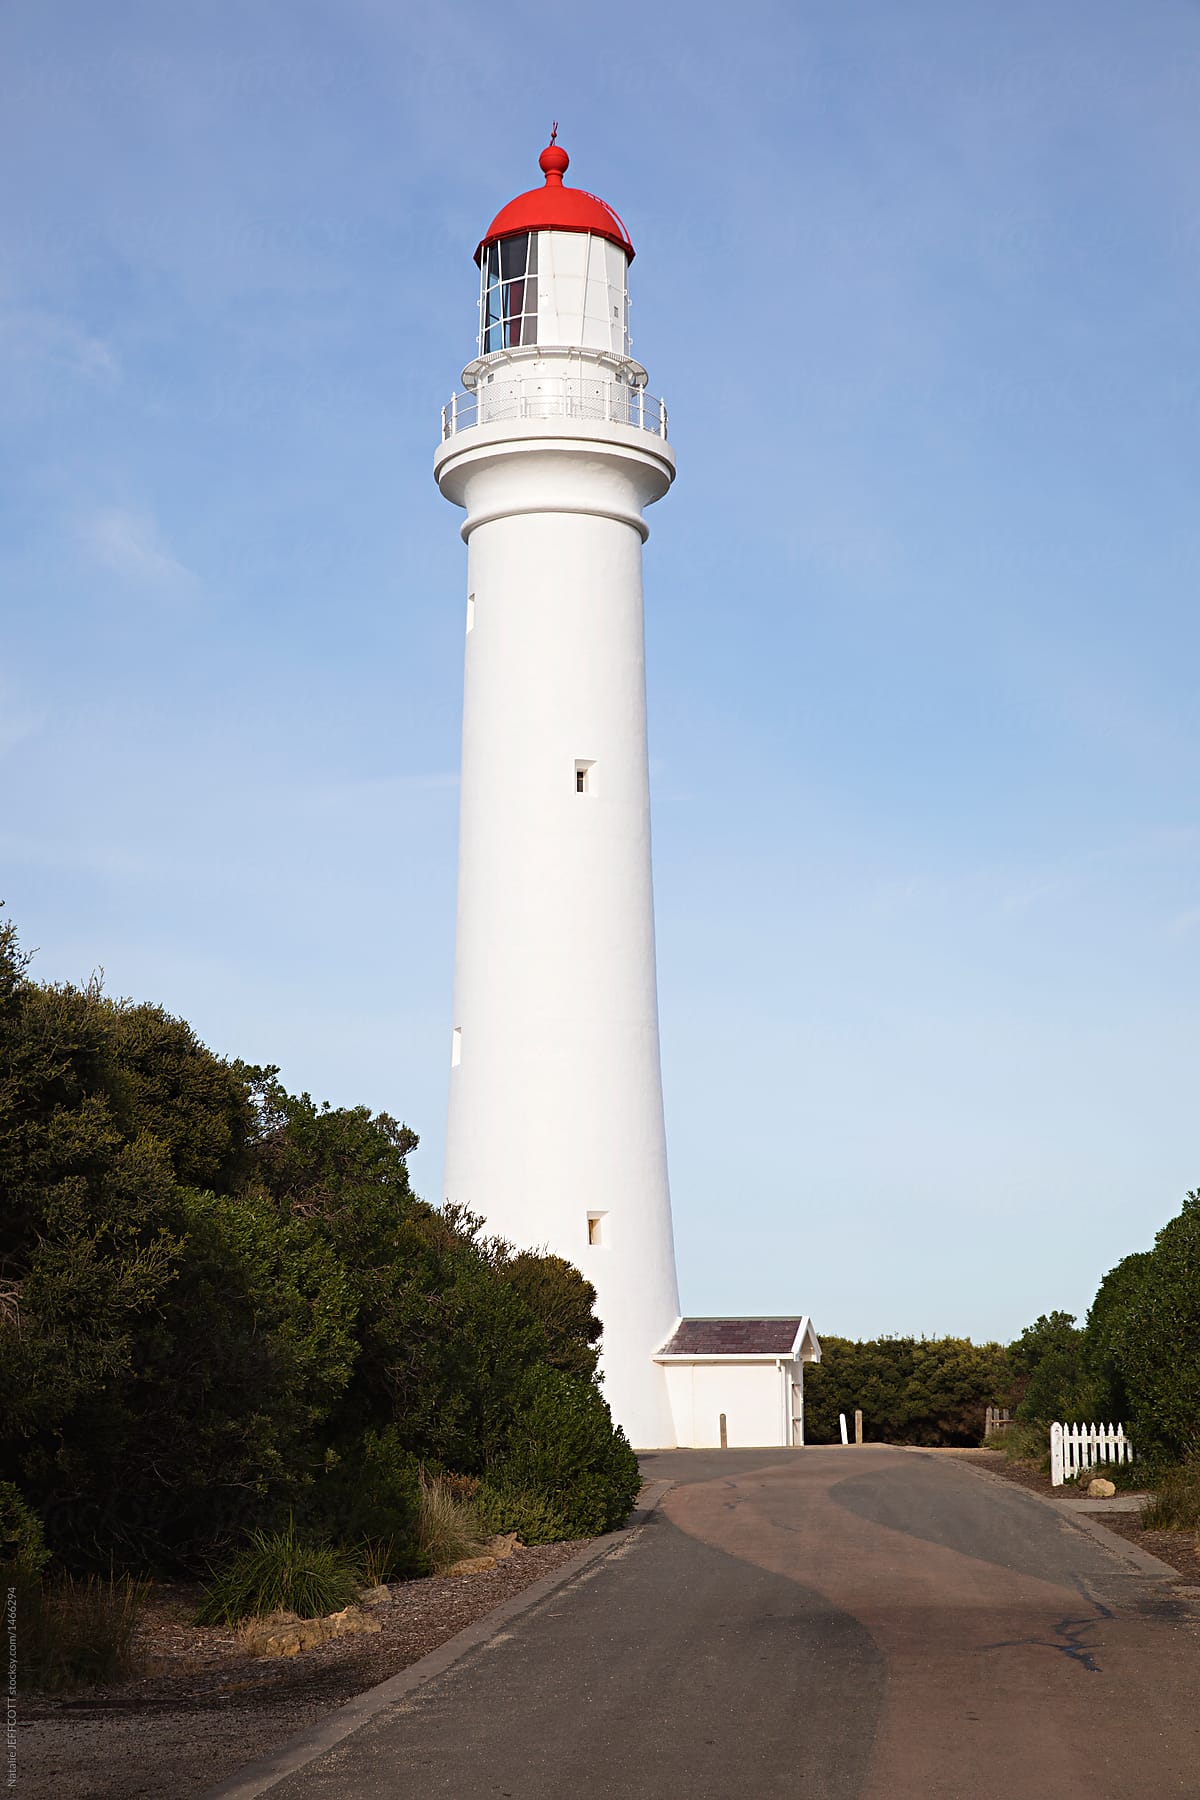 Split Point Light House at Aireys Inlet, along the Great Ocean Road in Victoria, Australia